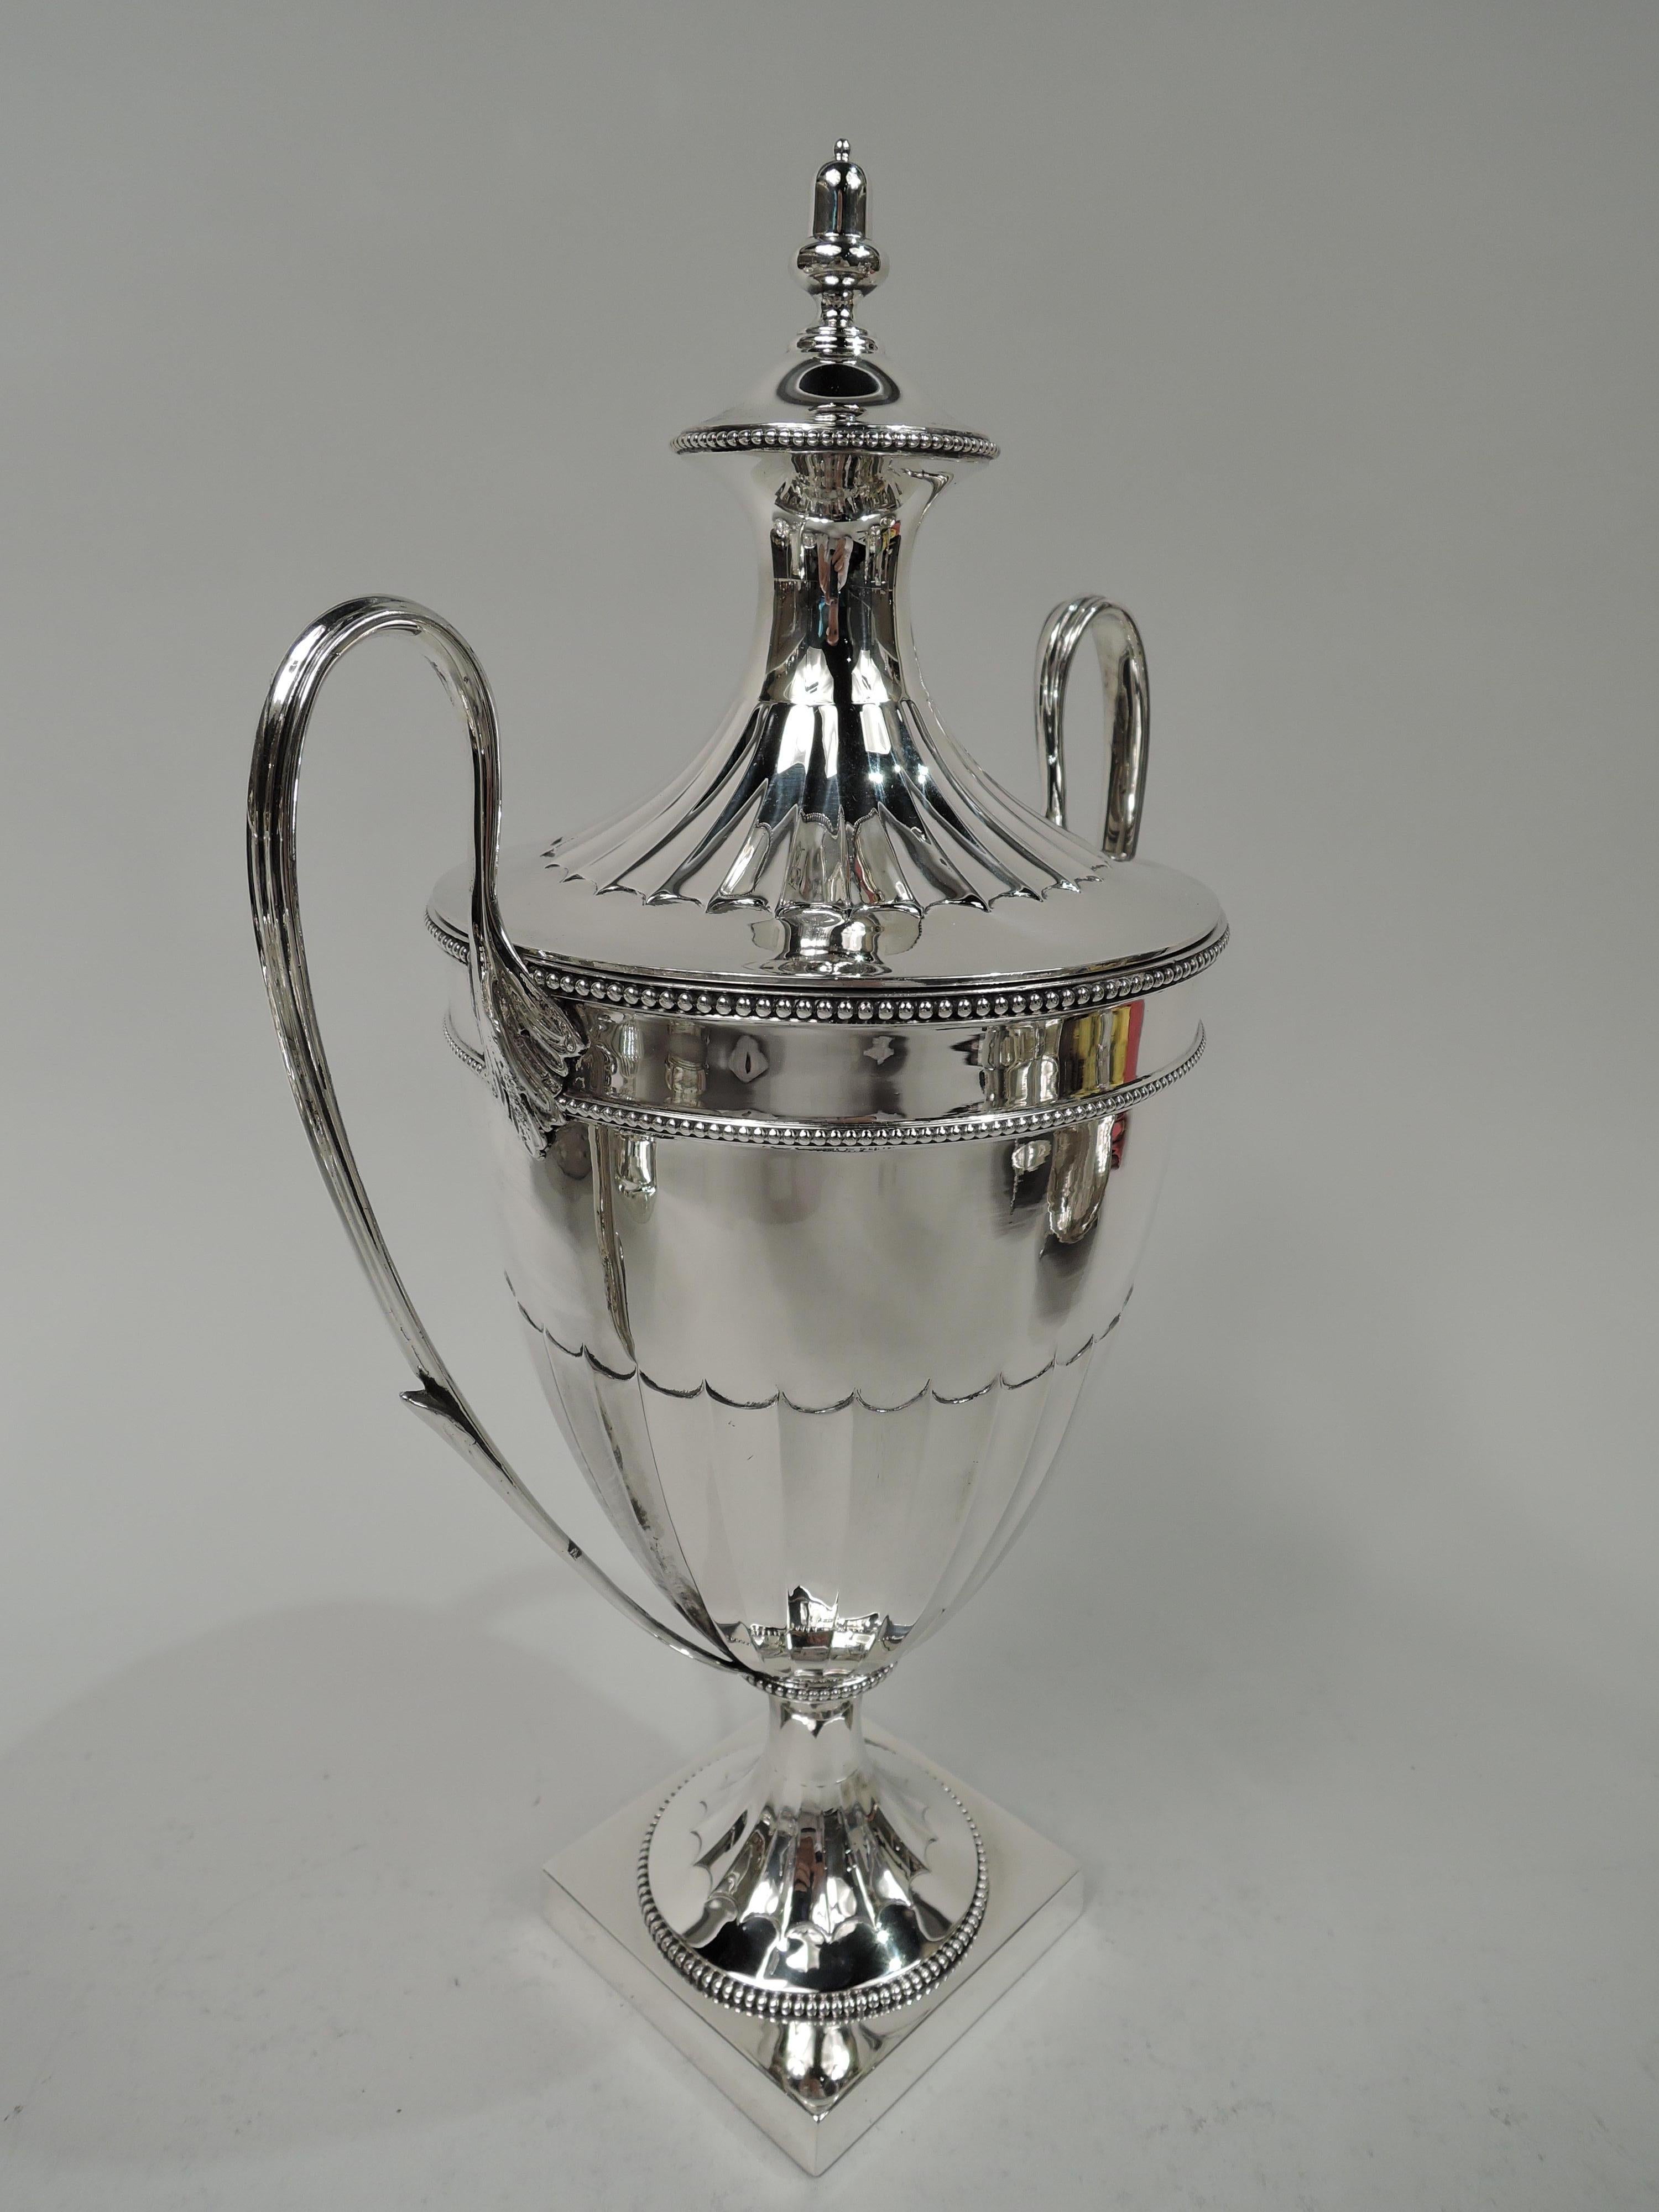 Edwardian Classical sterling silver covered urn. Made by Millar Wilkinson in London in 1905. Ovoid with reeded high-looping side handles and domed foot mounted to square base. Cover double-domed with acorn finial. Beading and fluting. Fully marked.